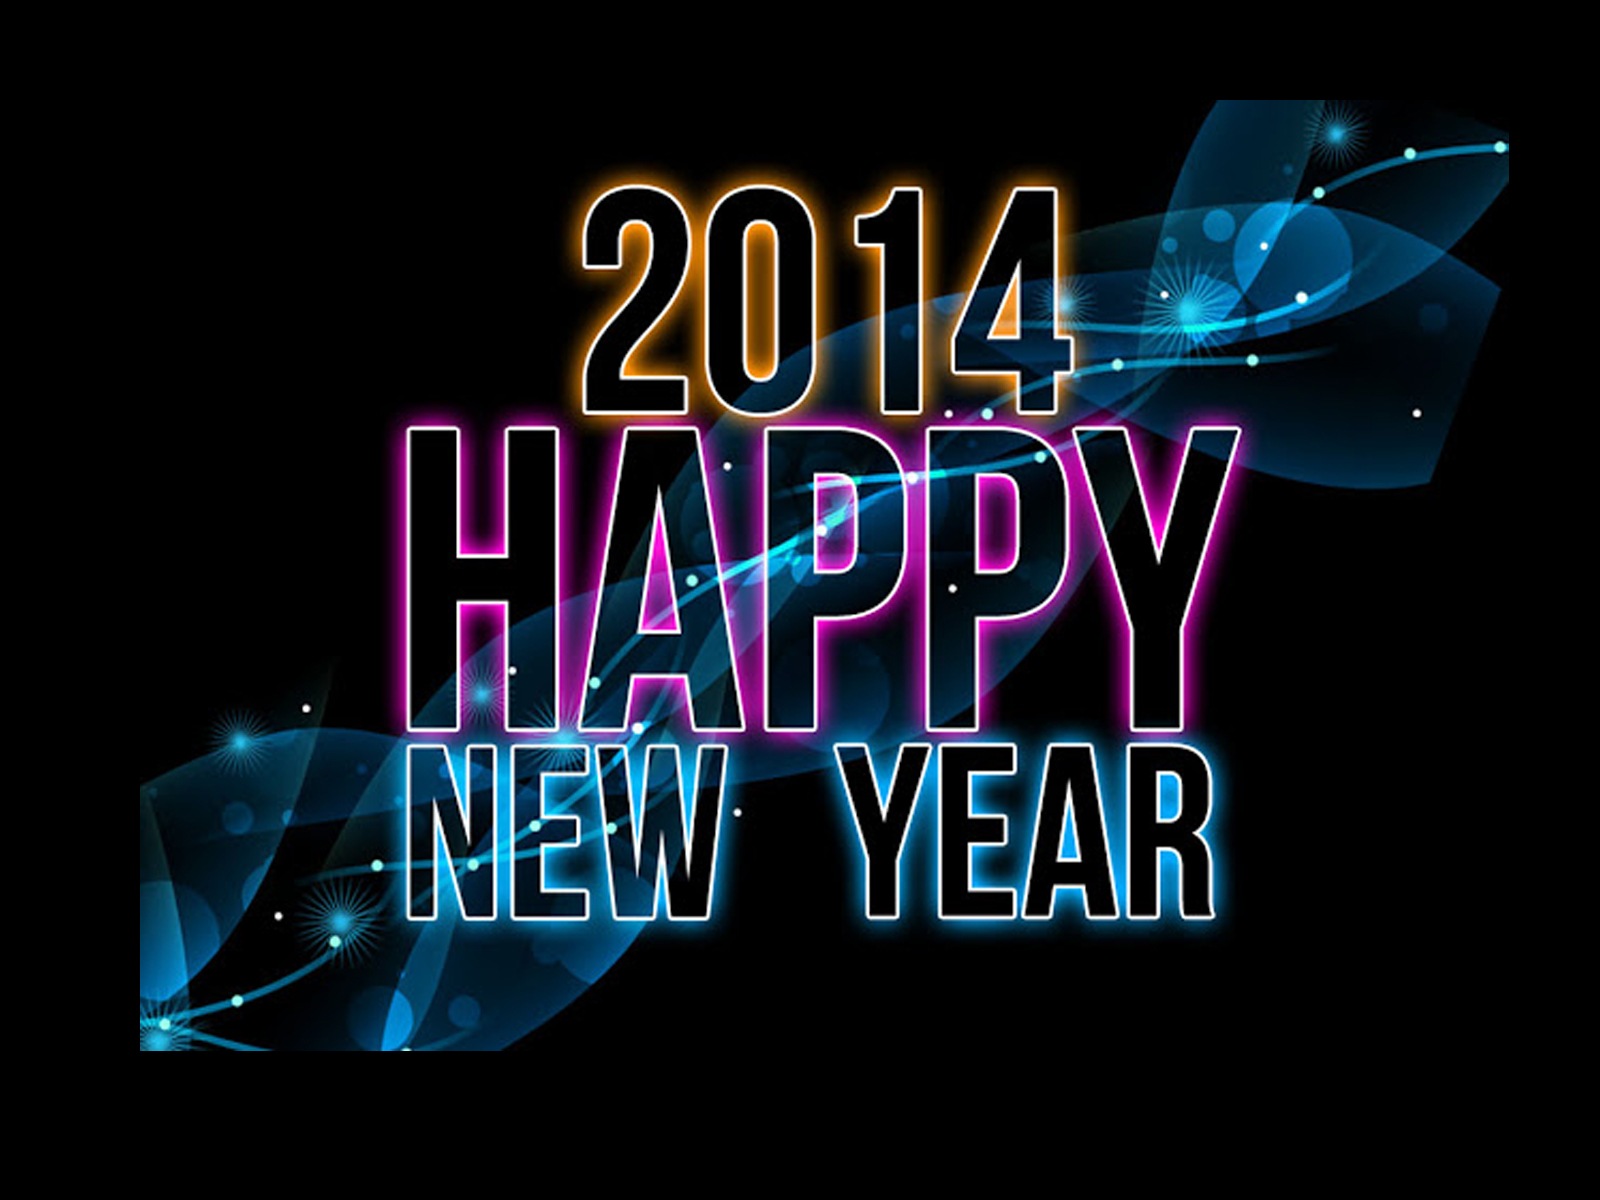 2014 New Year Theme HD Wallpapers (1) #11 - 1600x1200